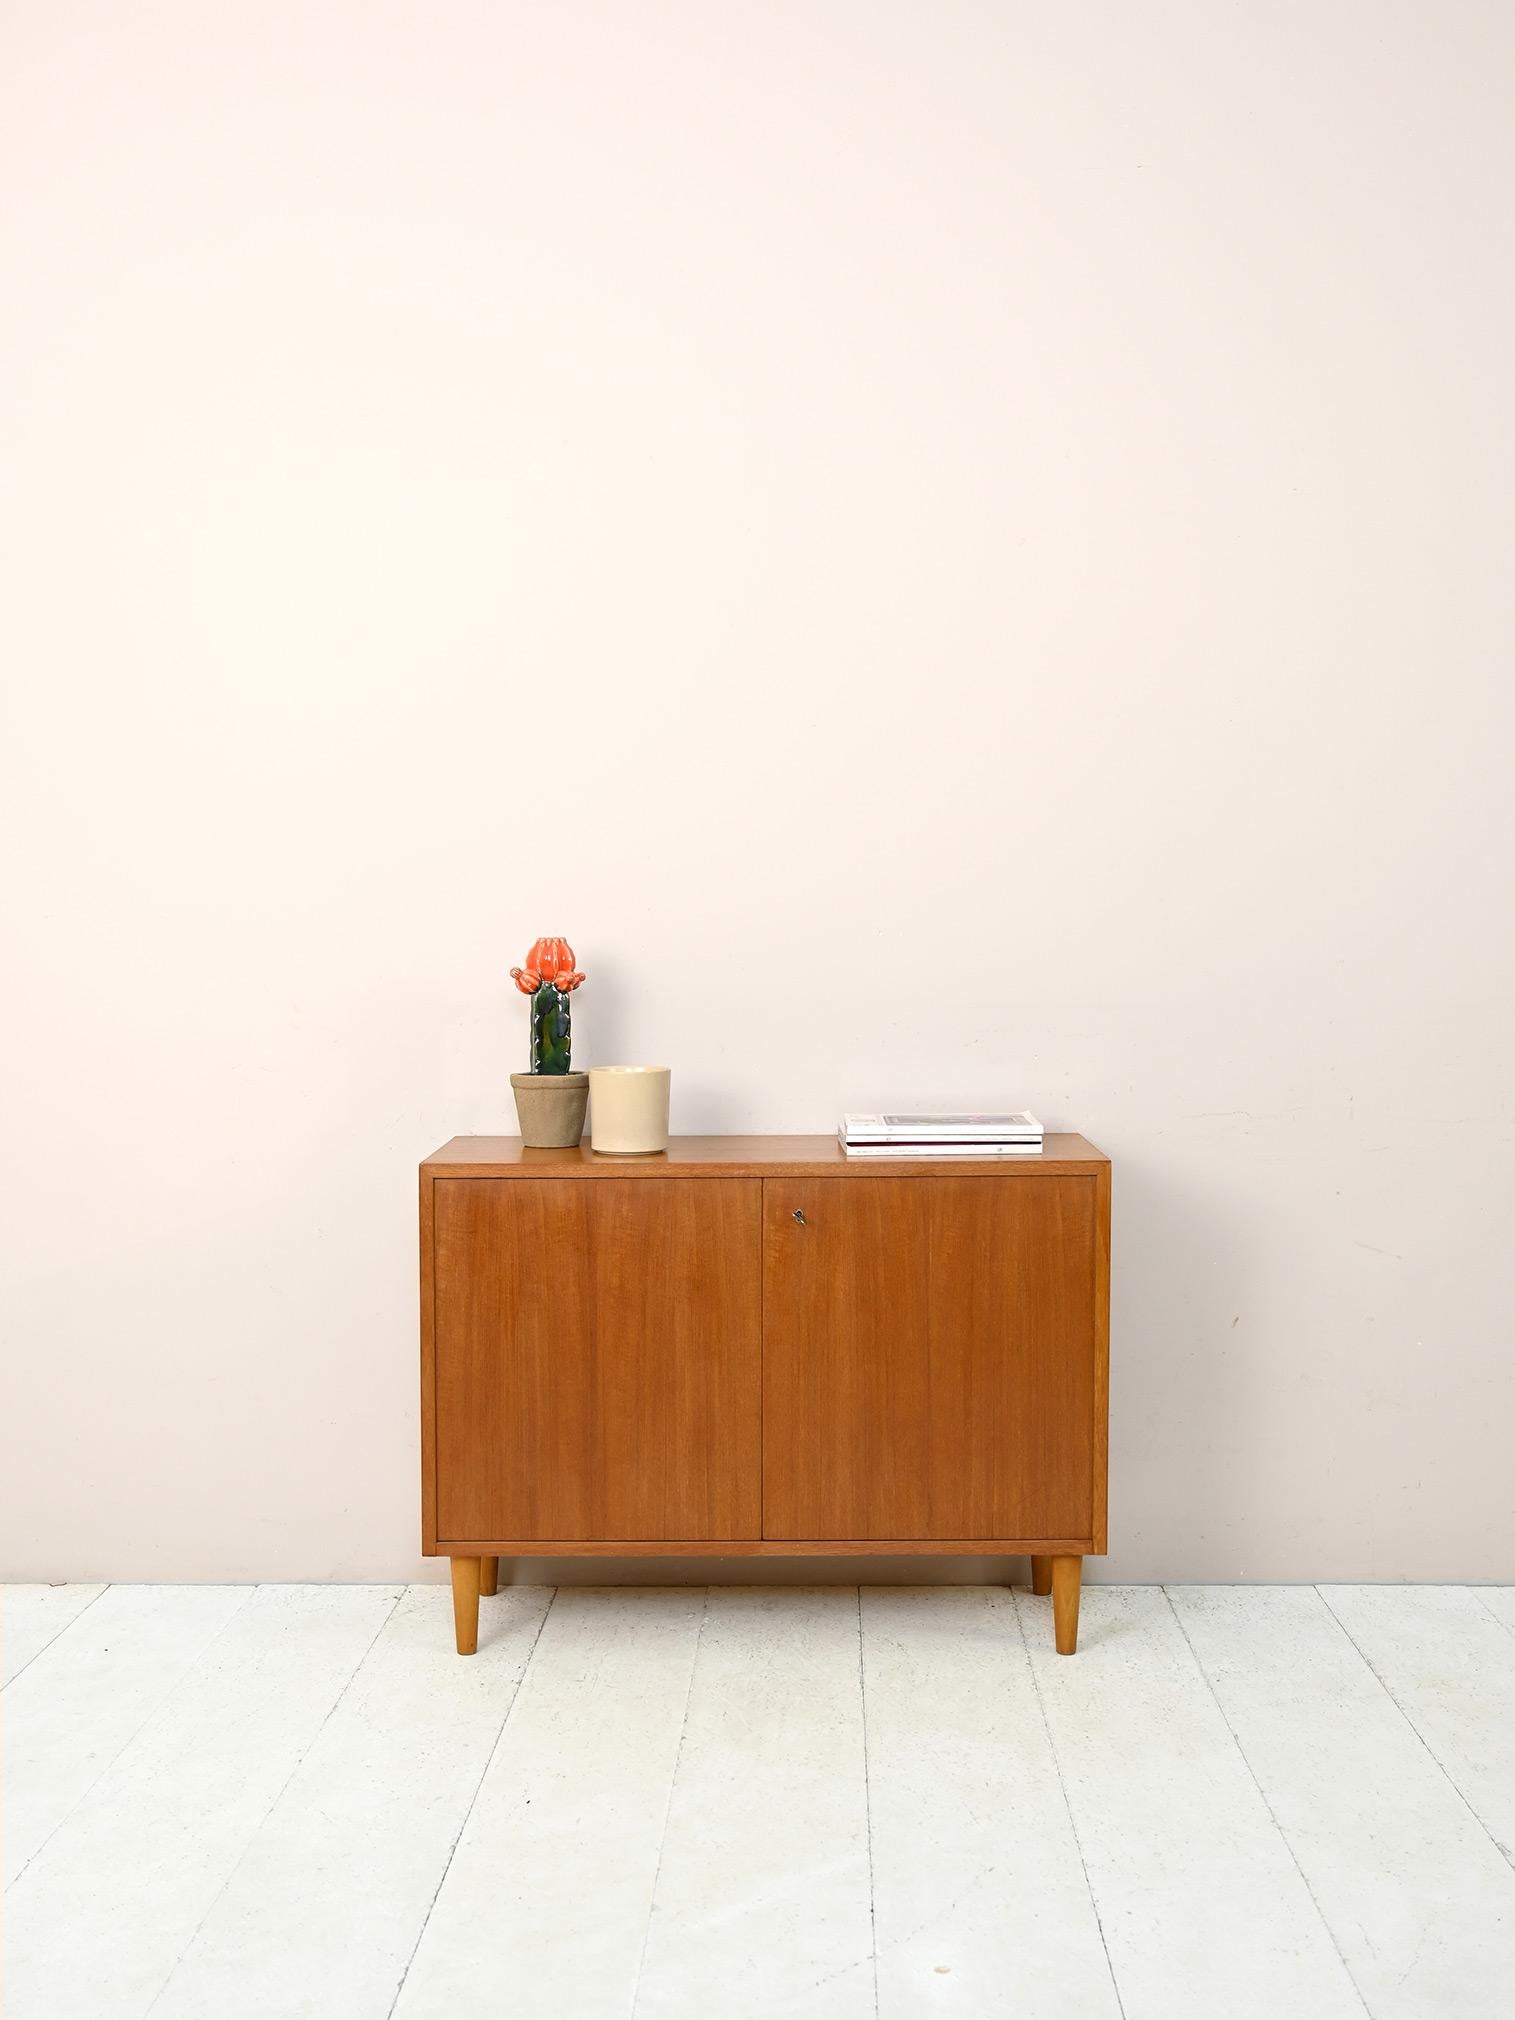 Small Scandinavian sideboard from the 1960s.

Simple forms reminiscent of mid-century modern taste.
The structure with square lines consists of a storage compartment closed by lockable hinged doors. Tapered, light oak wood feet lighten the